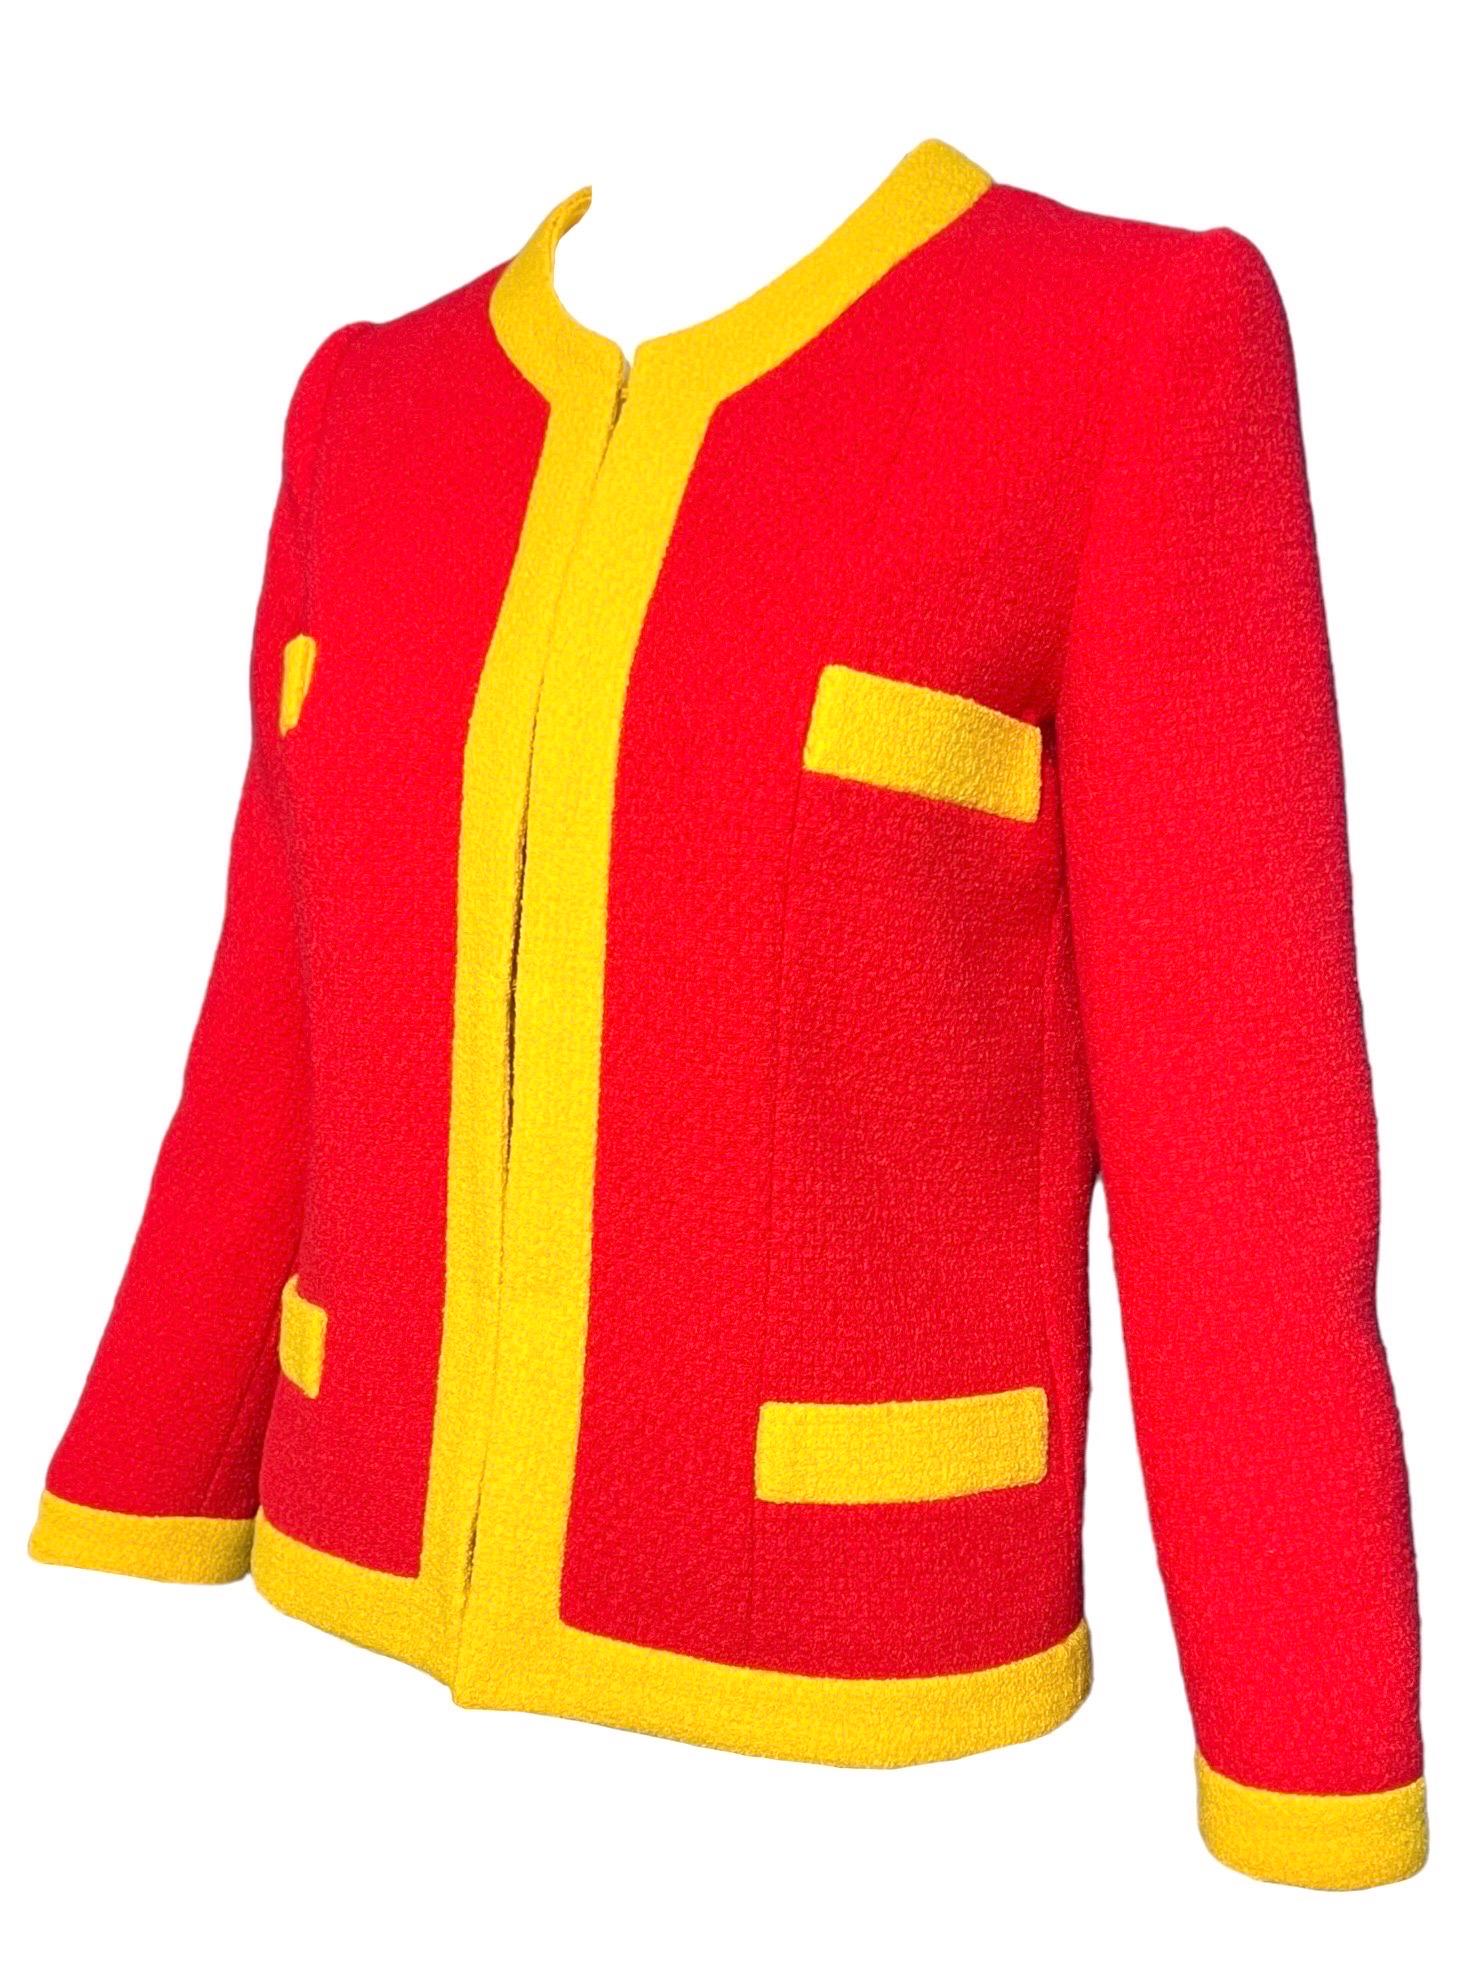 Moschino Couture McDonalds Runway Tweed Blazer F/W 2014 For Sale 4